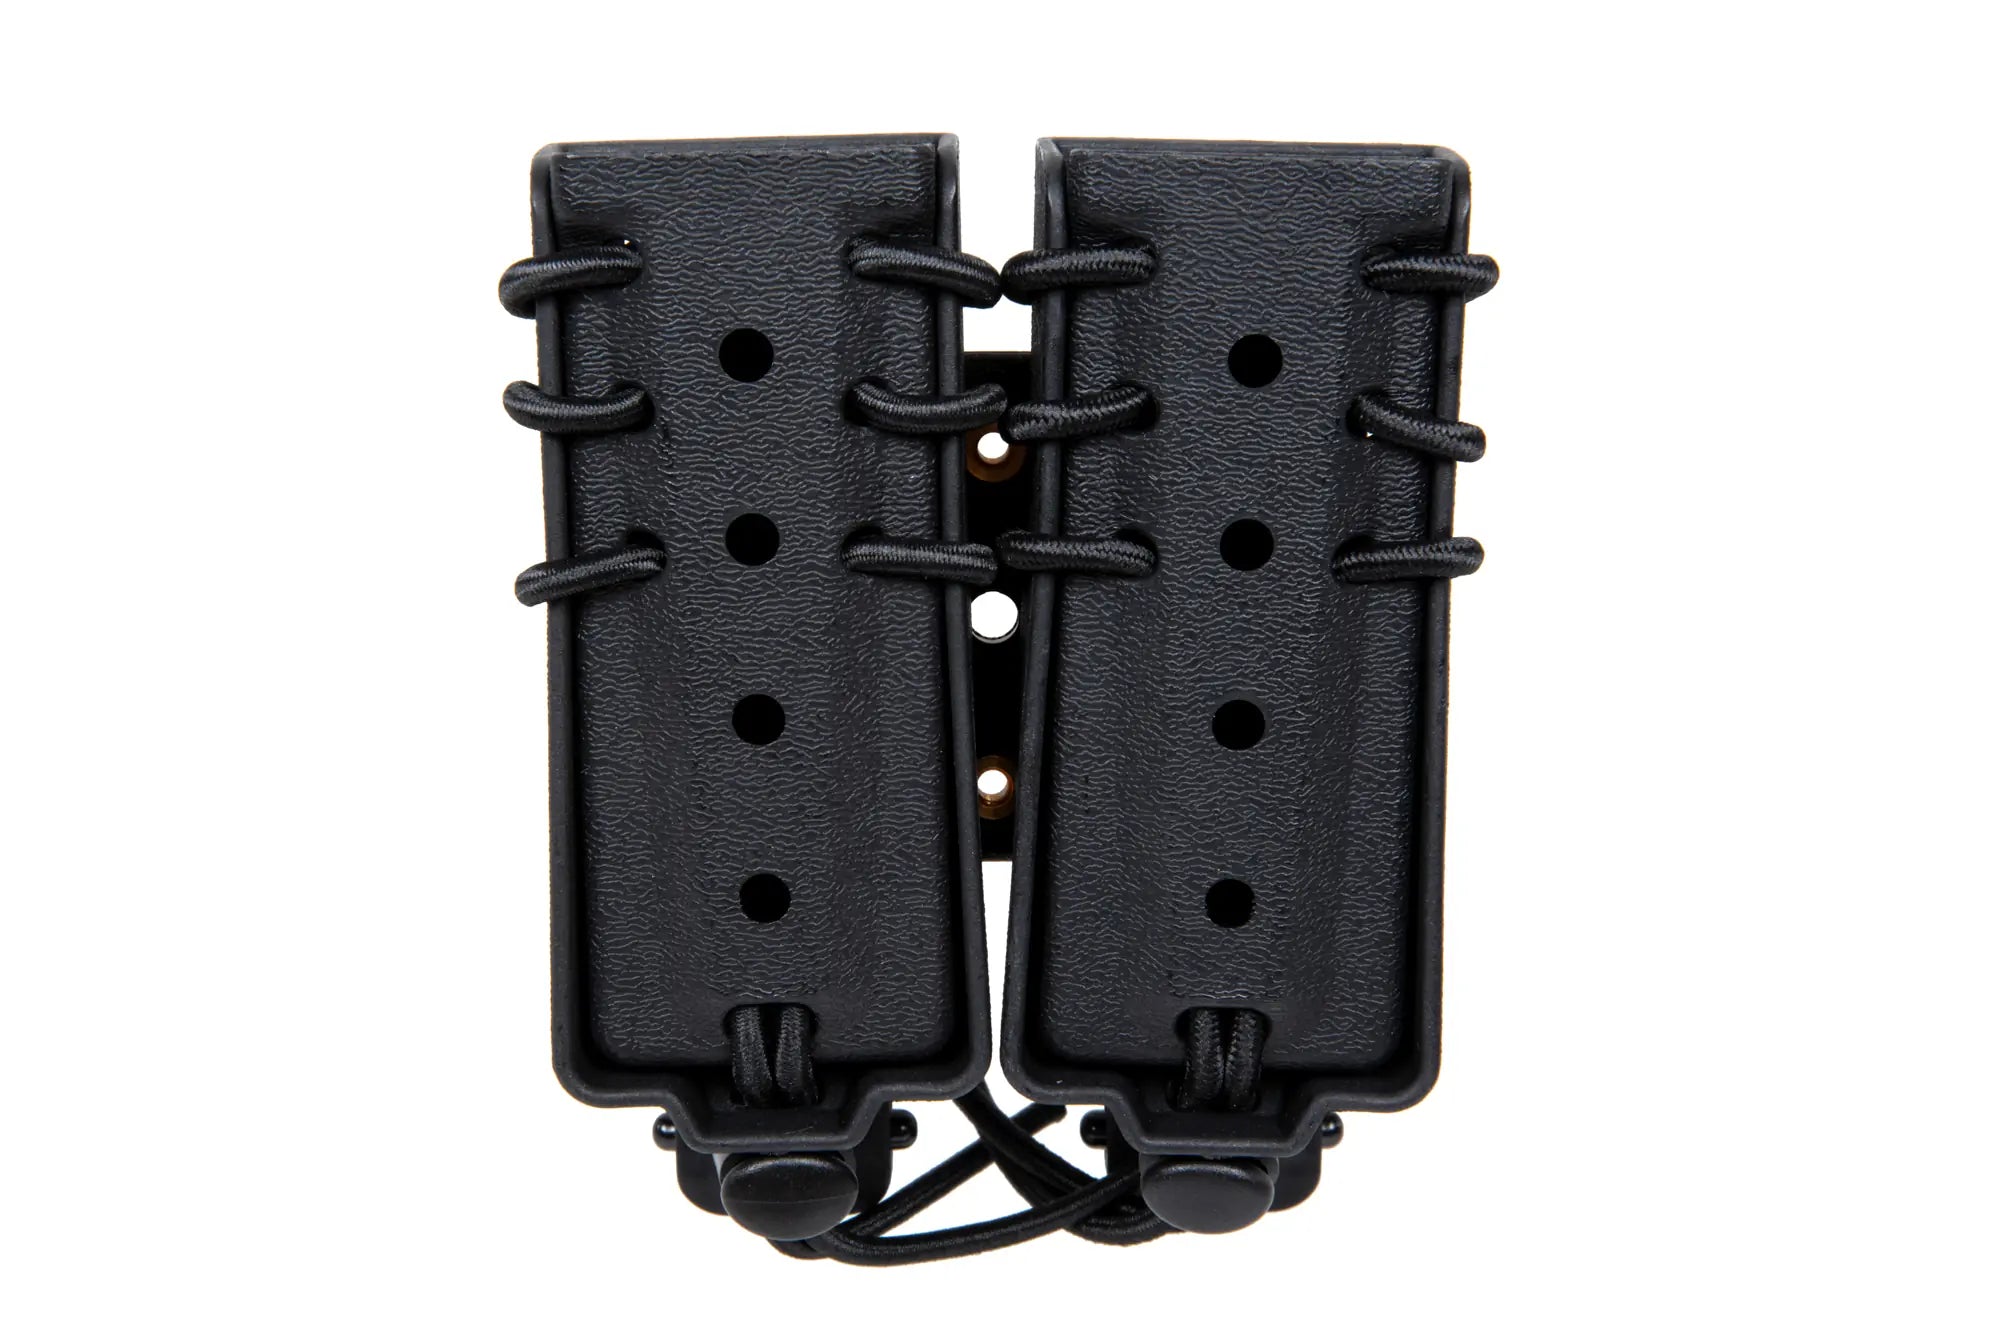 Carrier for 2 9mm magazines Wosport Urban Assault Long Quick Pull Black-2